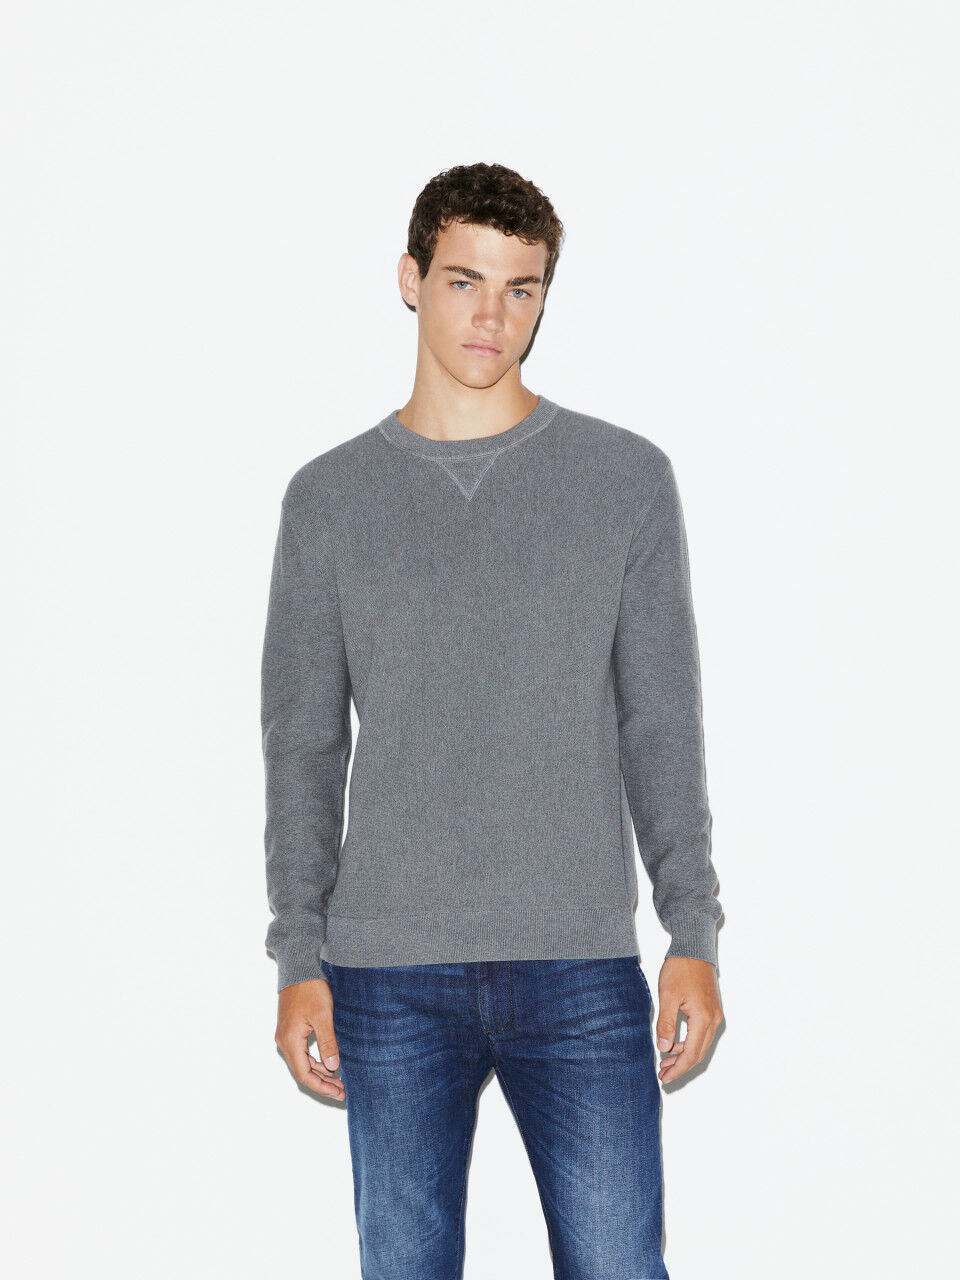 Relaxed fit sweater